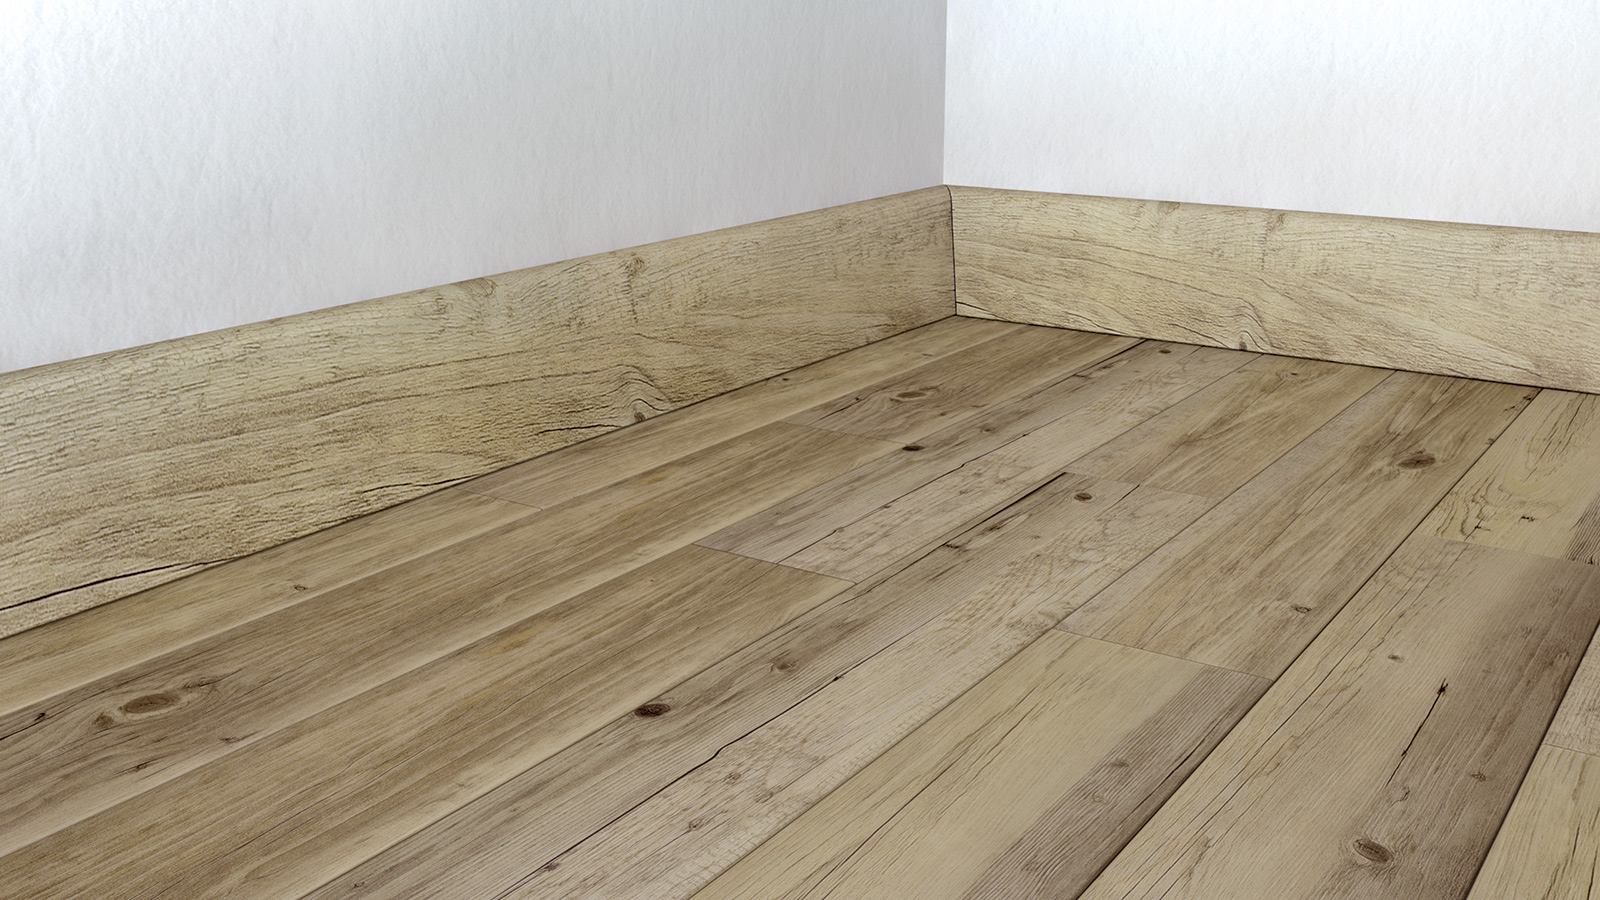 Wooden Skirting Boards - The Solid Wood Flooring Company